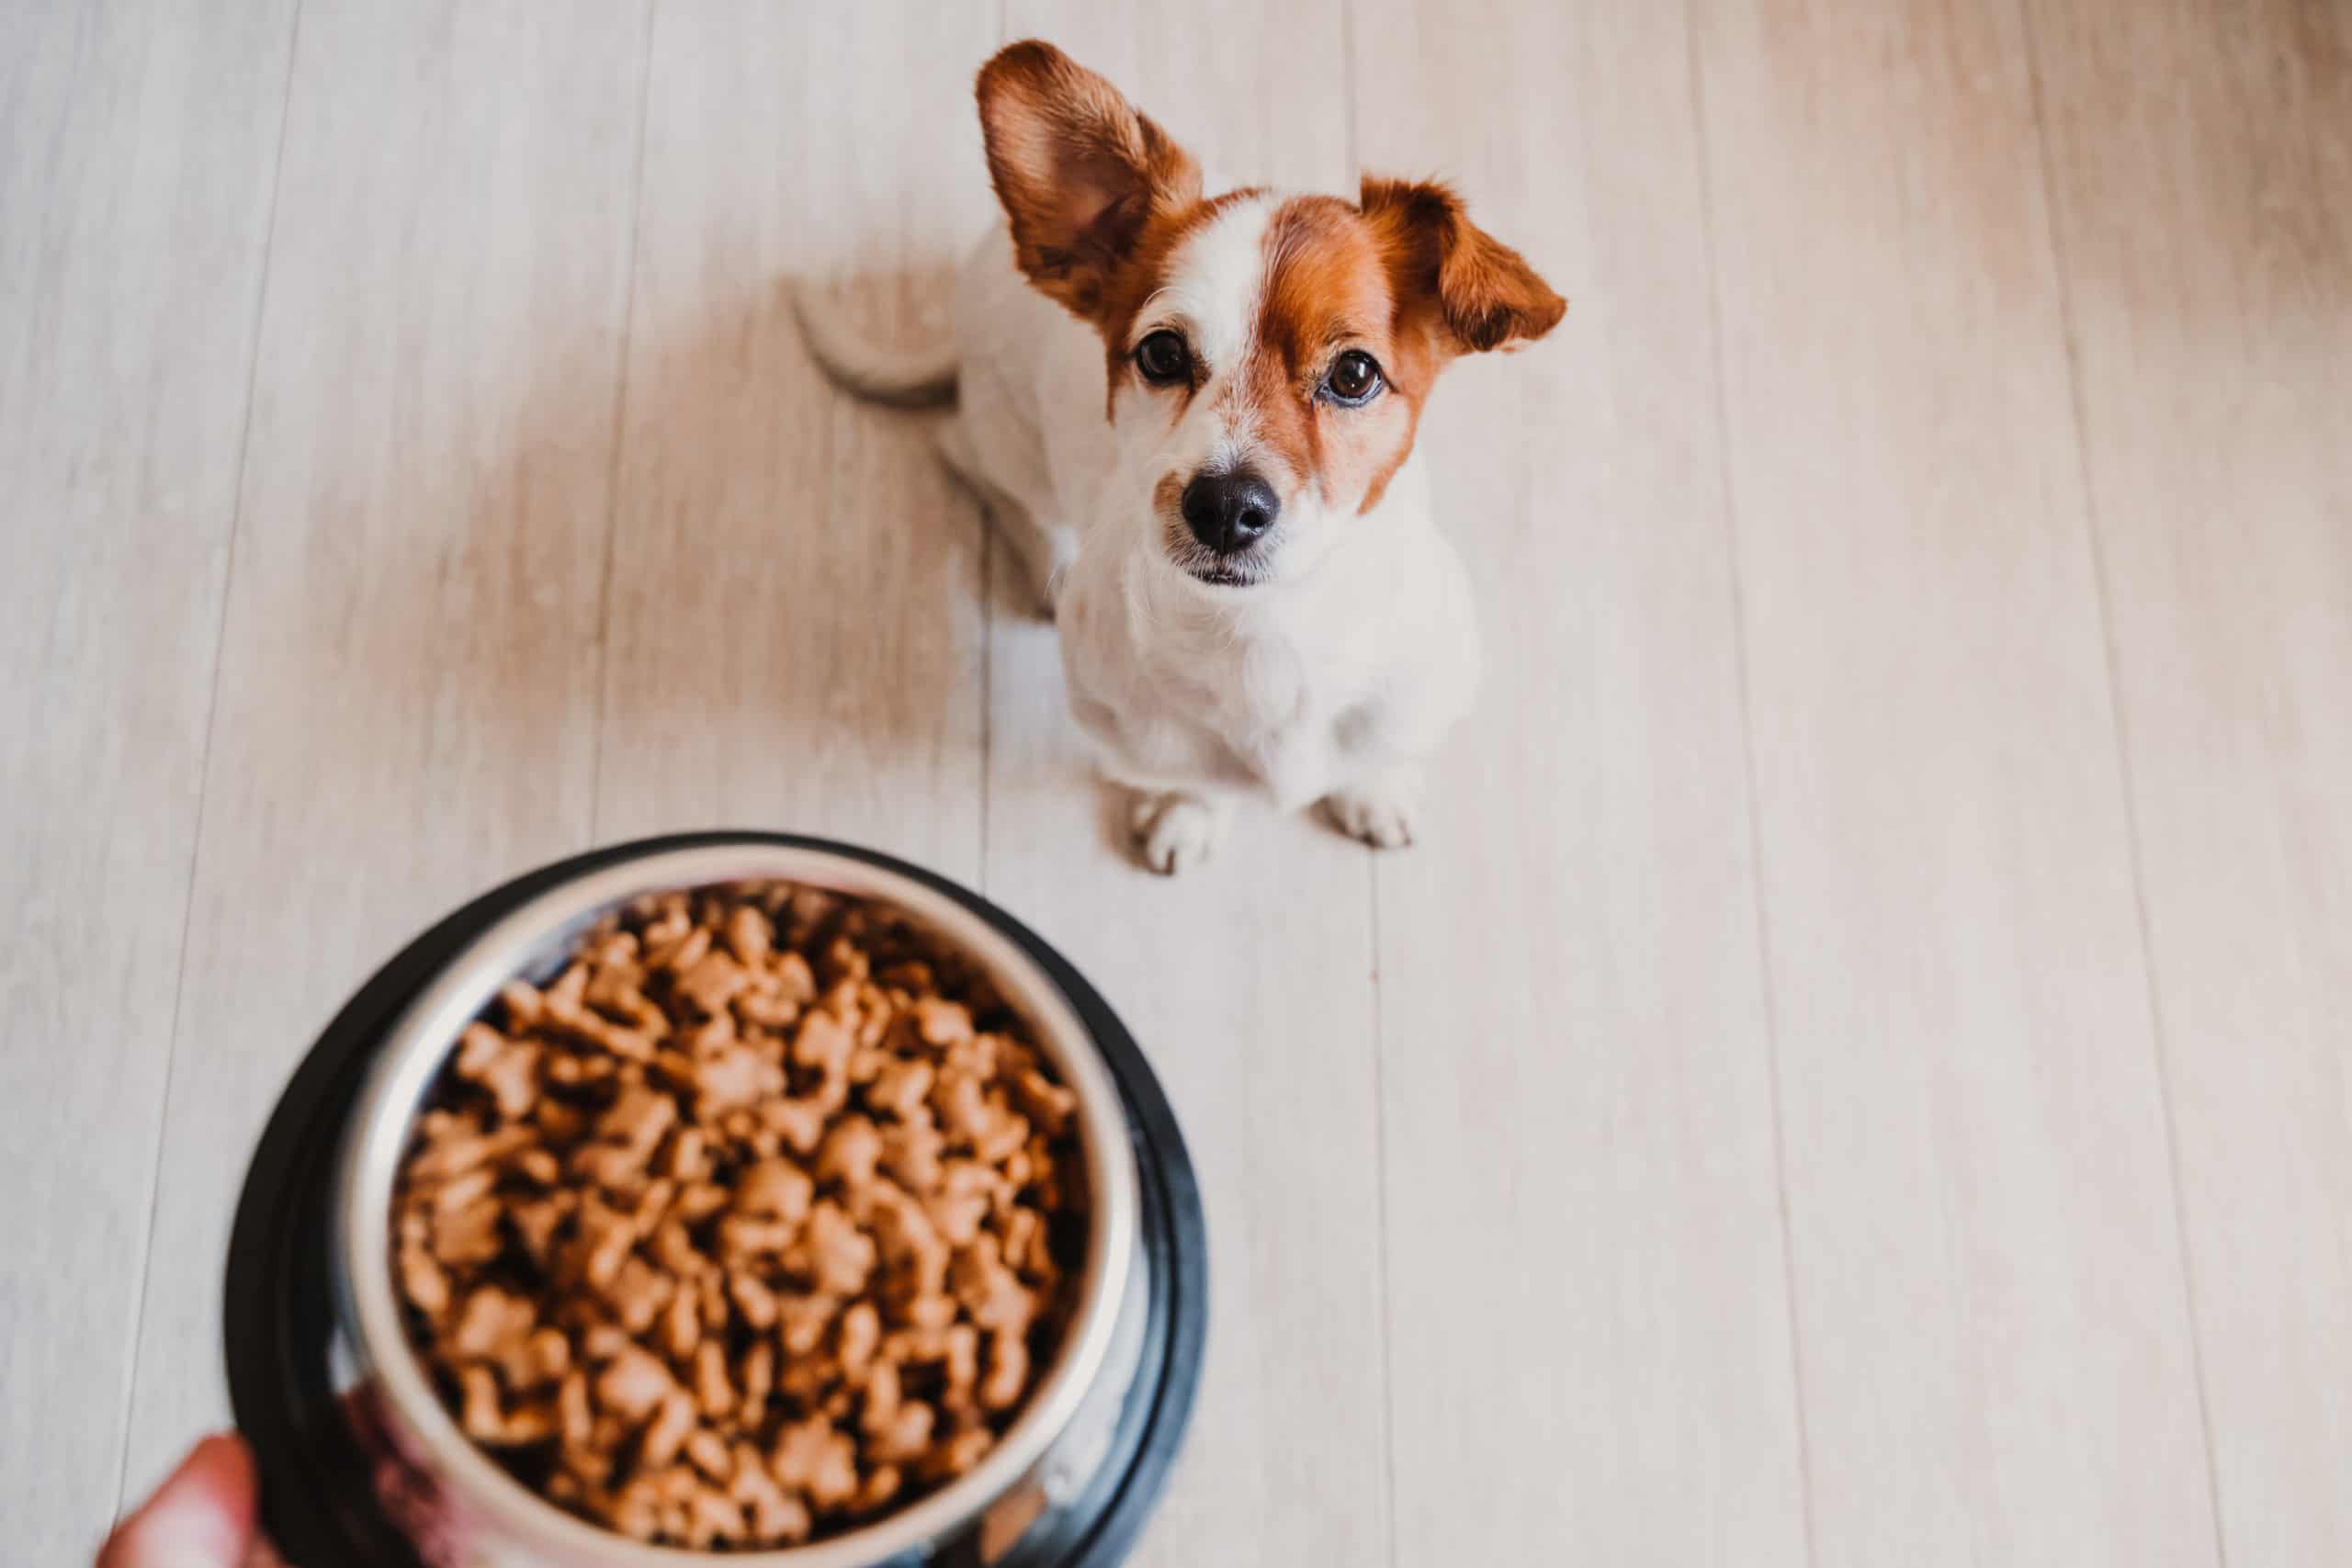 Is it normal for dogs to only eat once a day?